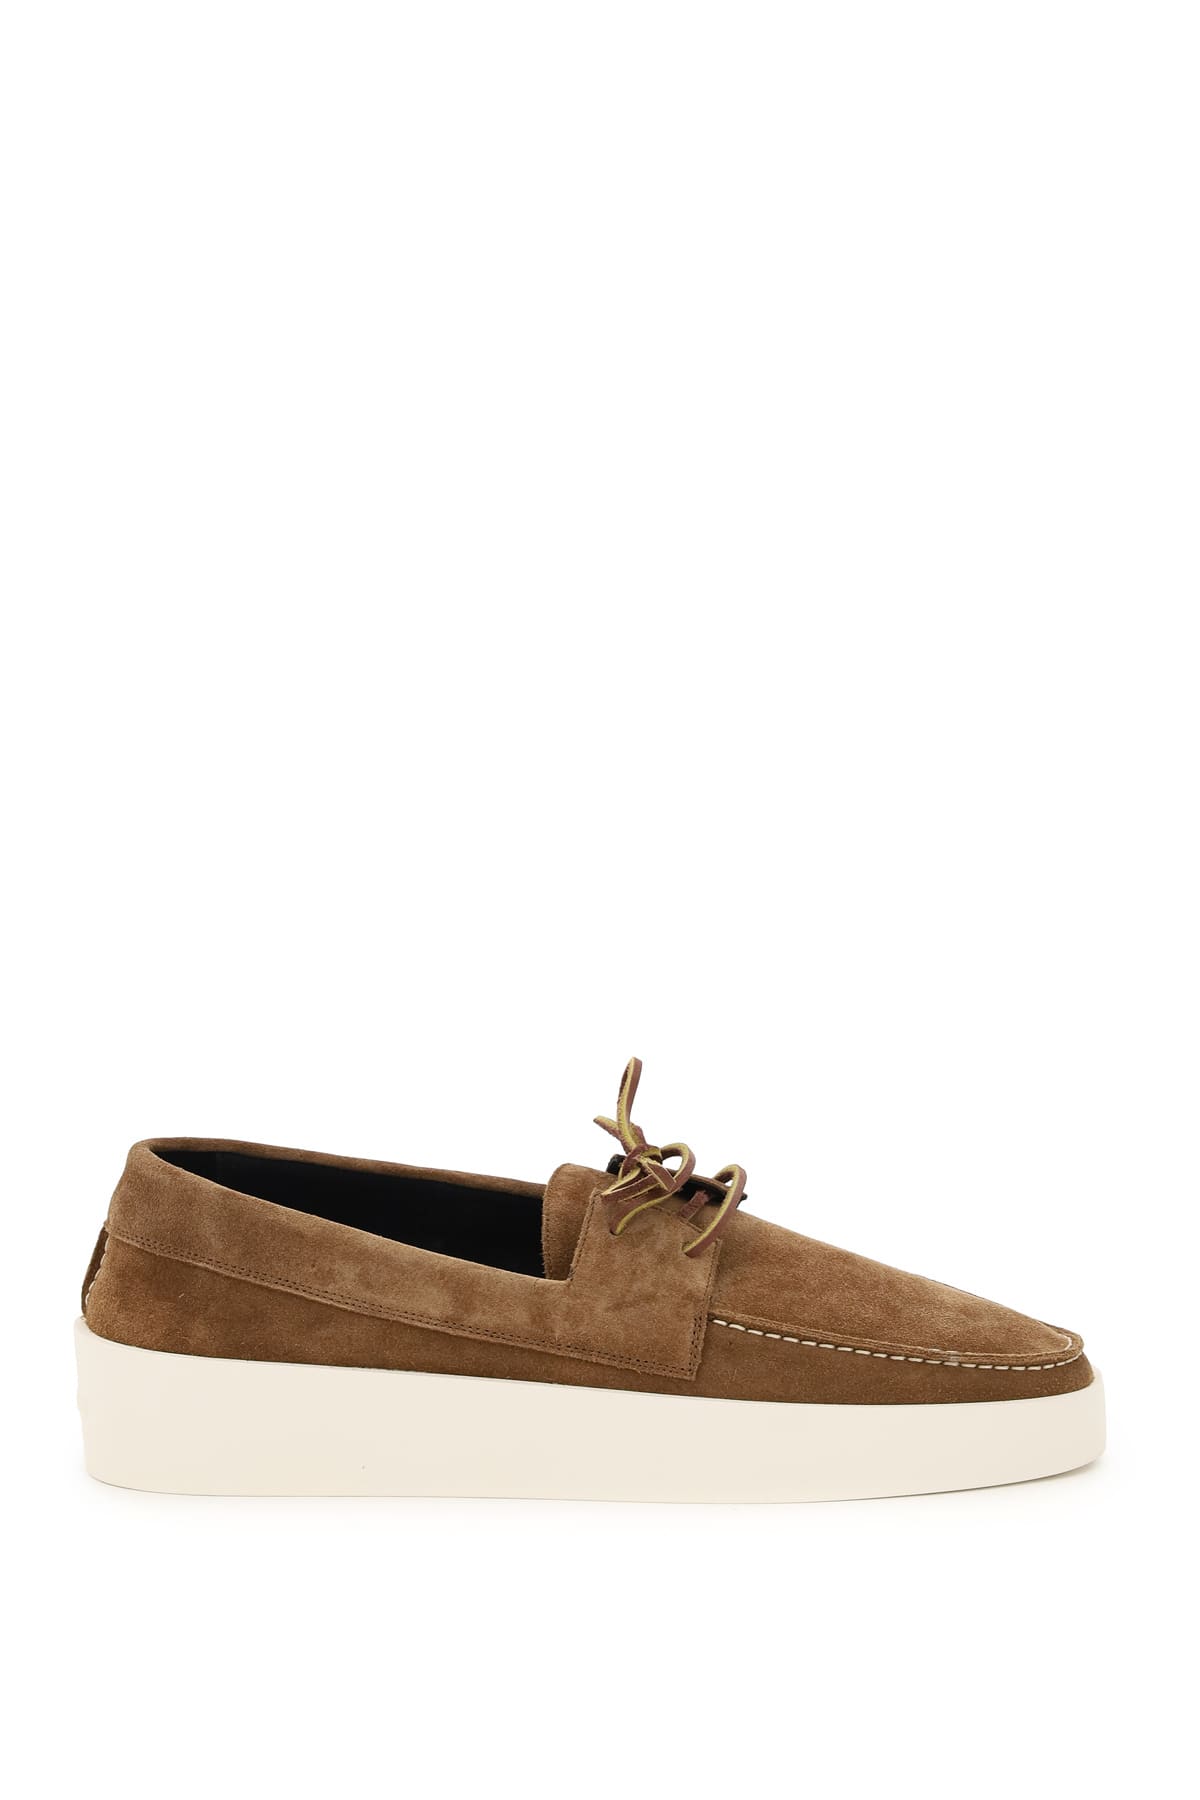 Fear of God Suede Boat Loafers